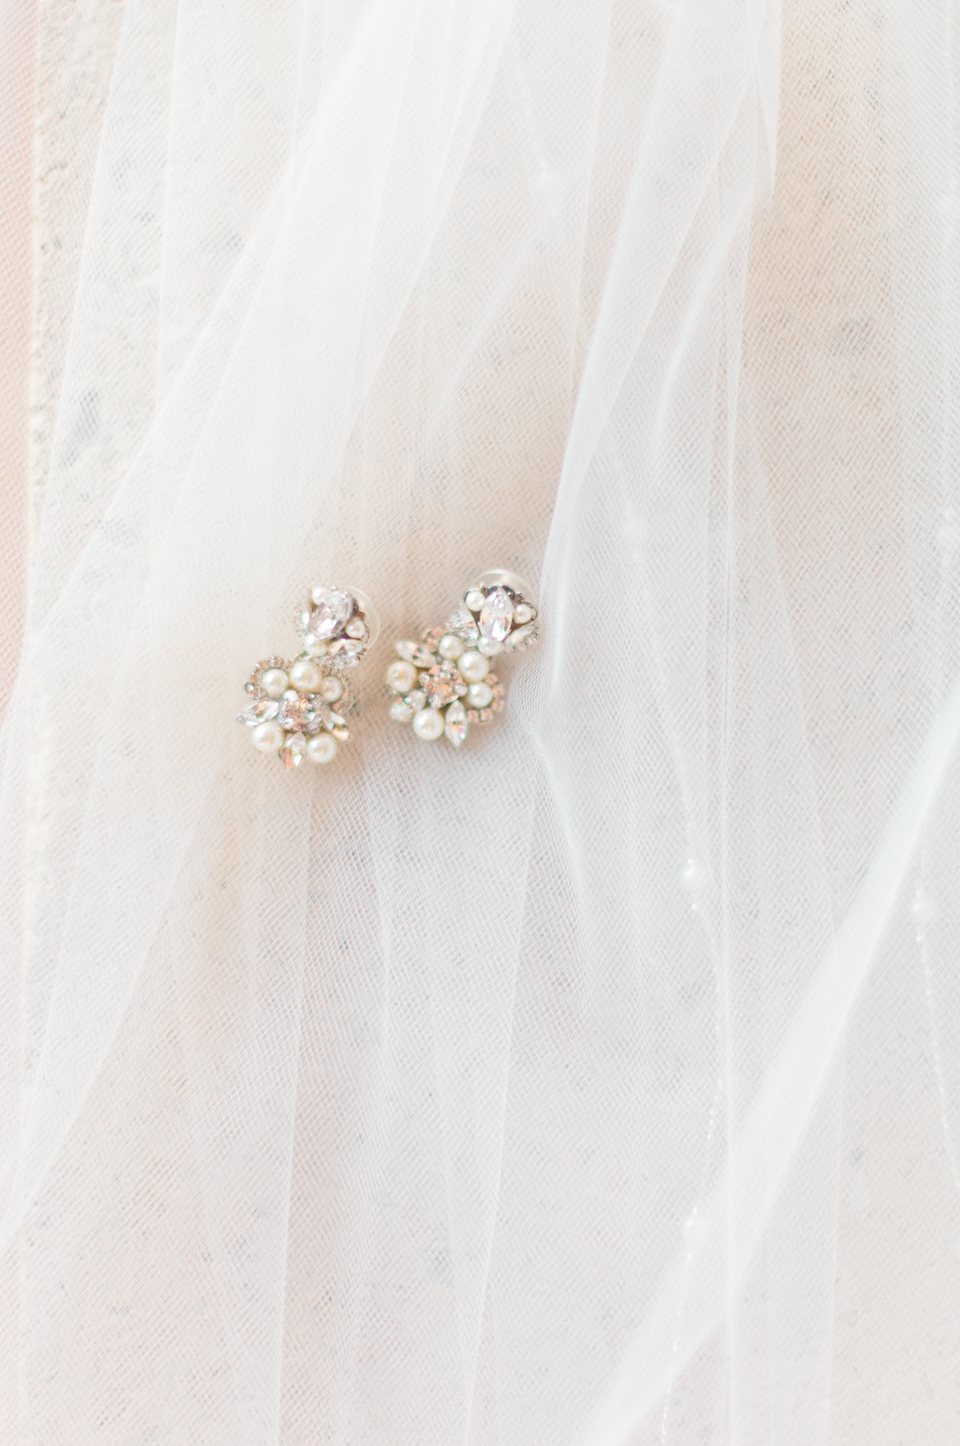 Image of diamond earrings laying on a bridal veil at TPC Sawgrass in Ponte Vedra, Florida